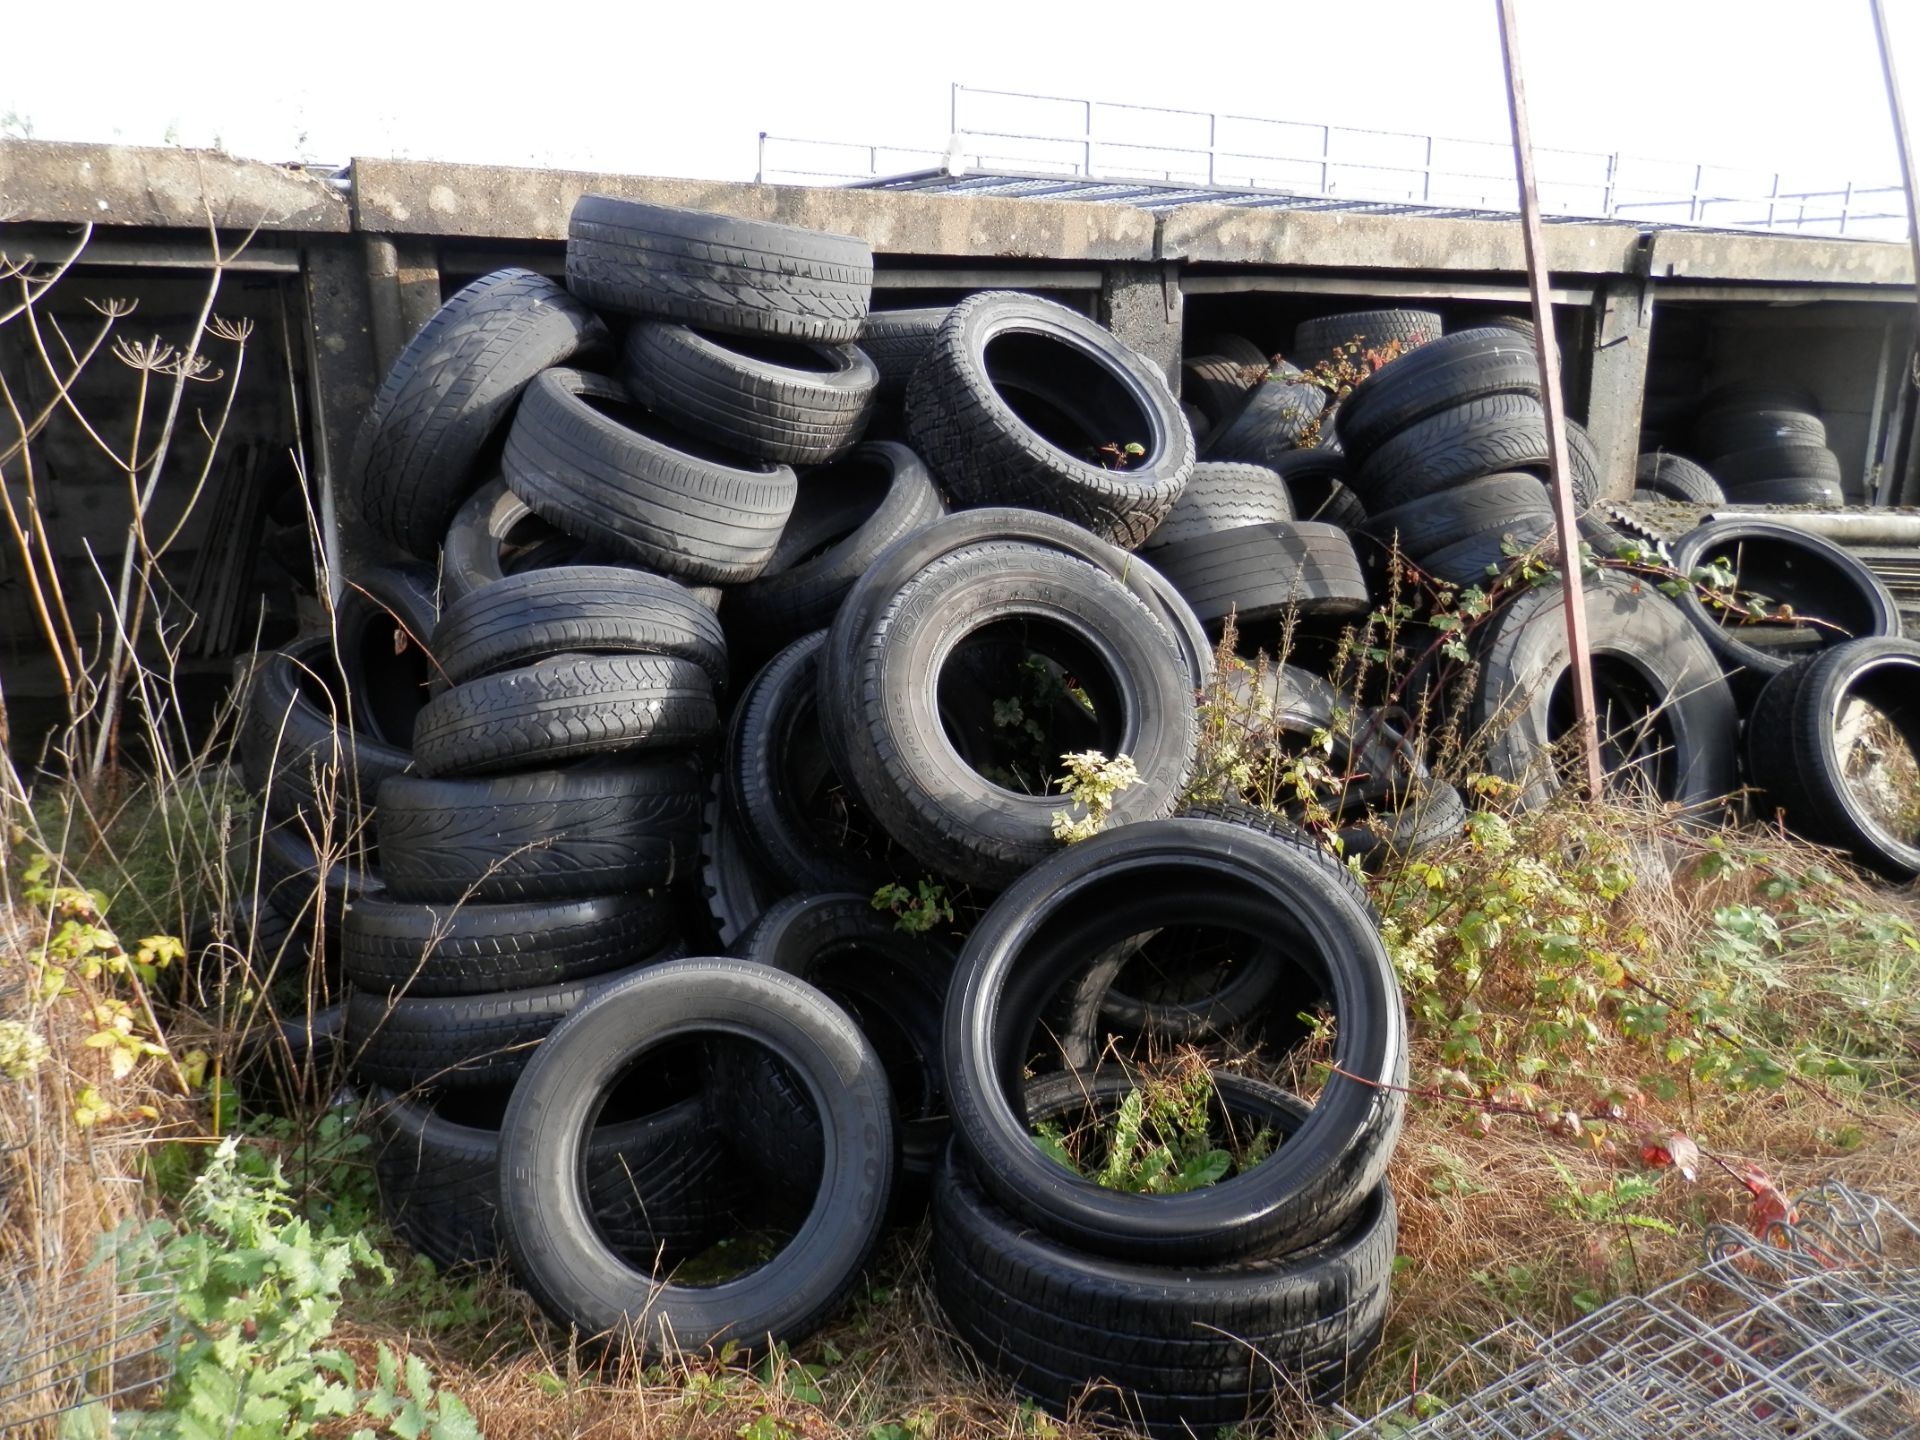 3 GARAGES FULL OF USED, PART WORN TYRES. ASSORTED FROM CAR TO LORRY TYRES. POSSIBLY 800+ GOT TO BE - Image 6 of 8